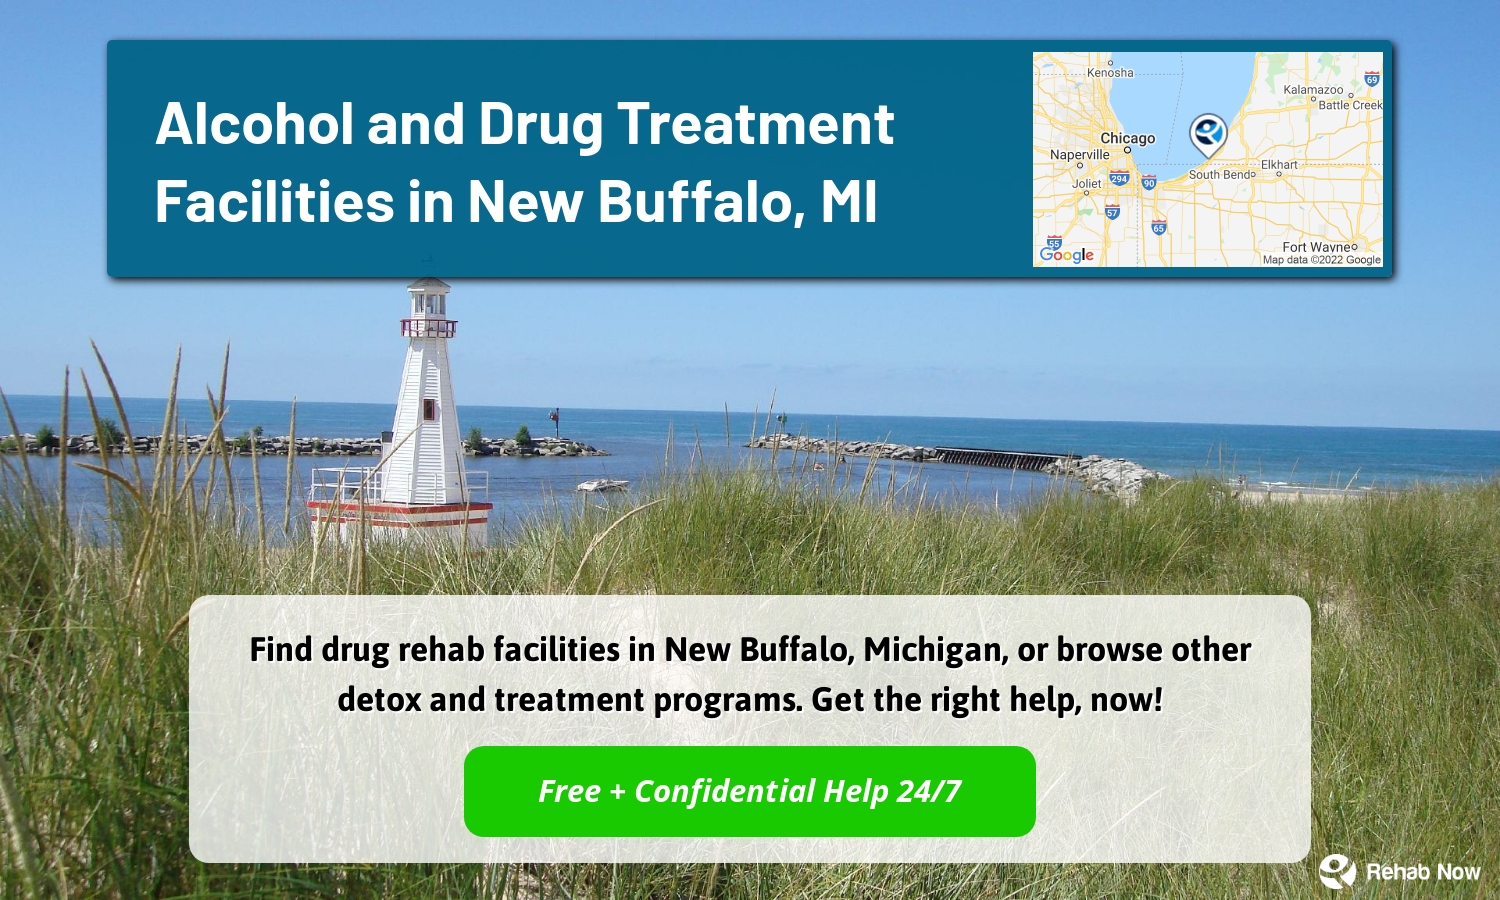 Find drug rehab facilities in New Buffalo, Michigan, or browse other detox and treatment programs. Get the right help, now!